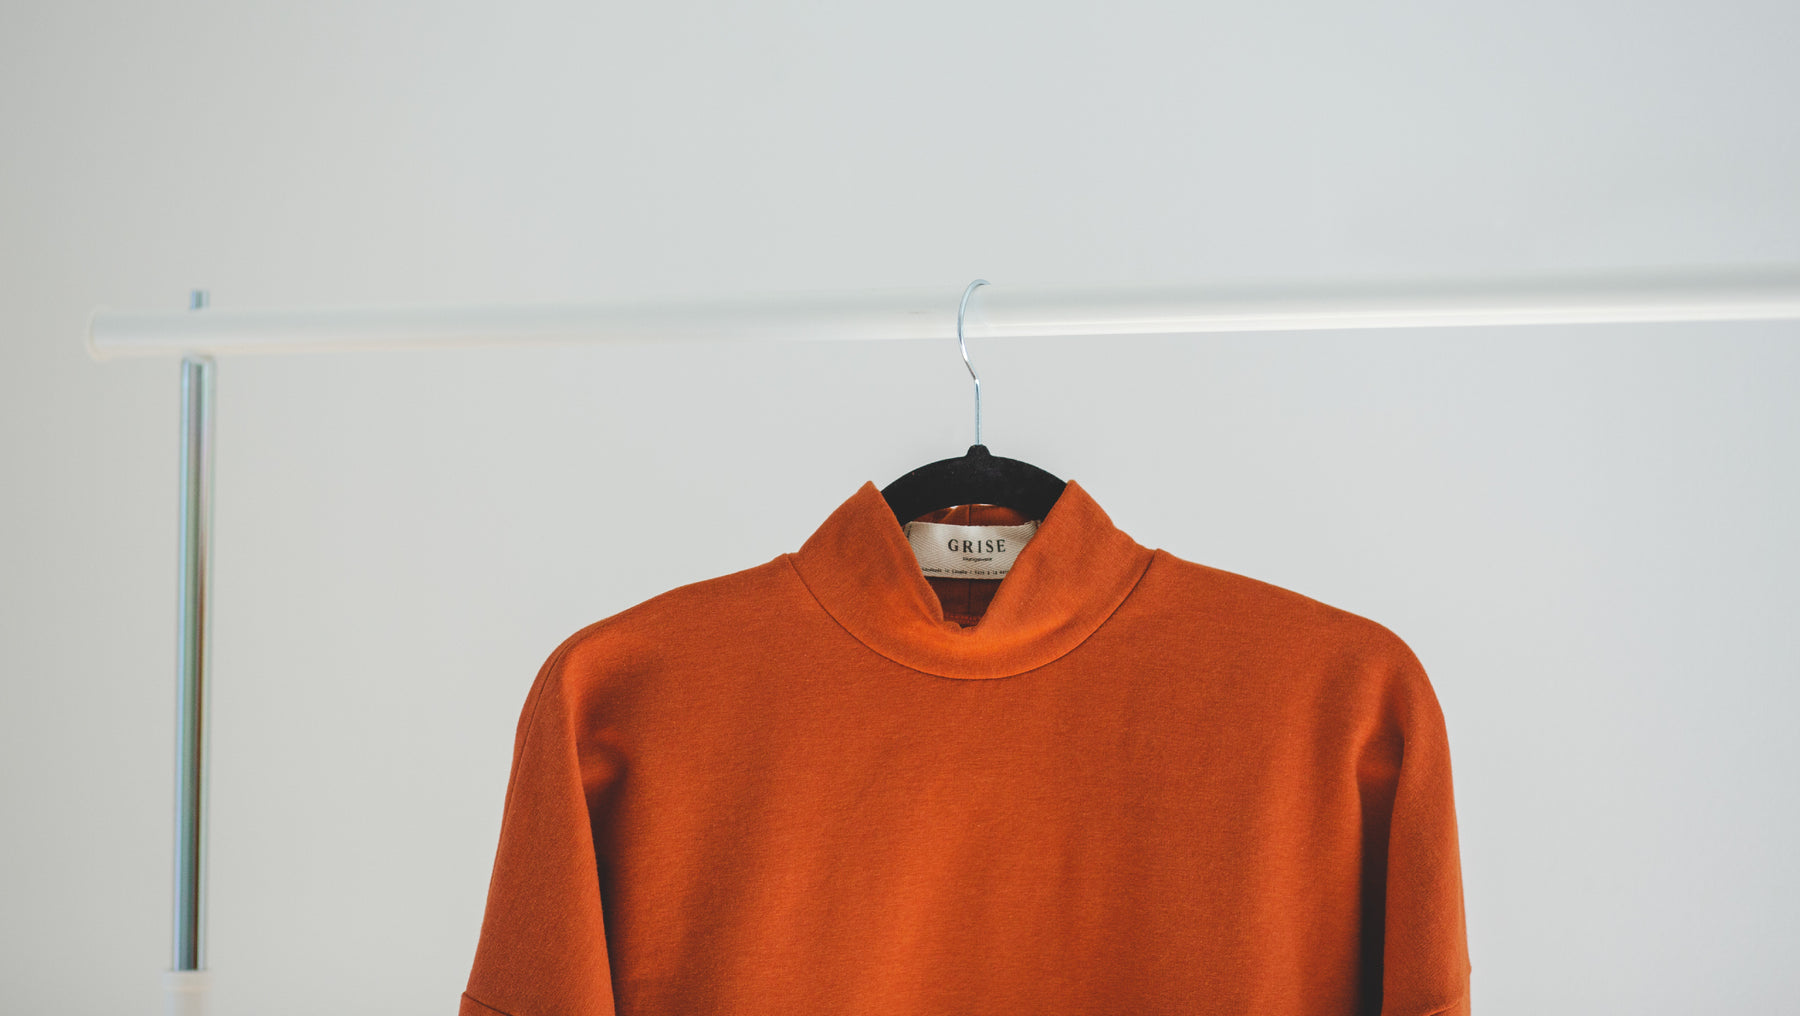 Grise Loungewear sweater in orange or ginger color hanging on a garment support